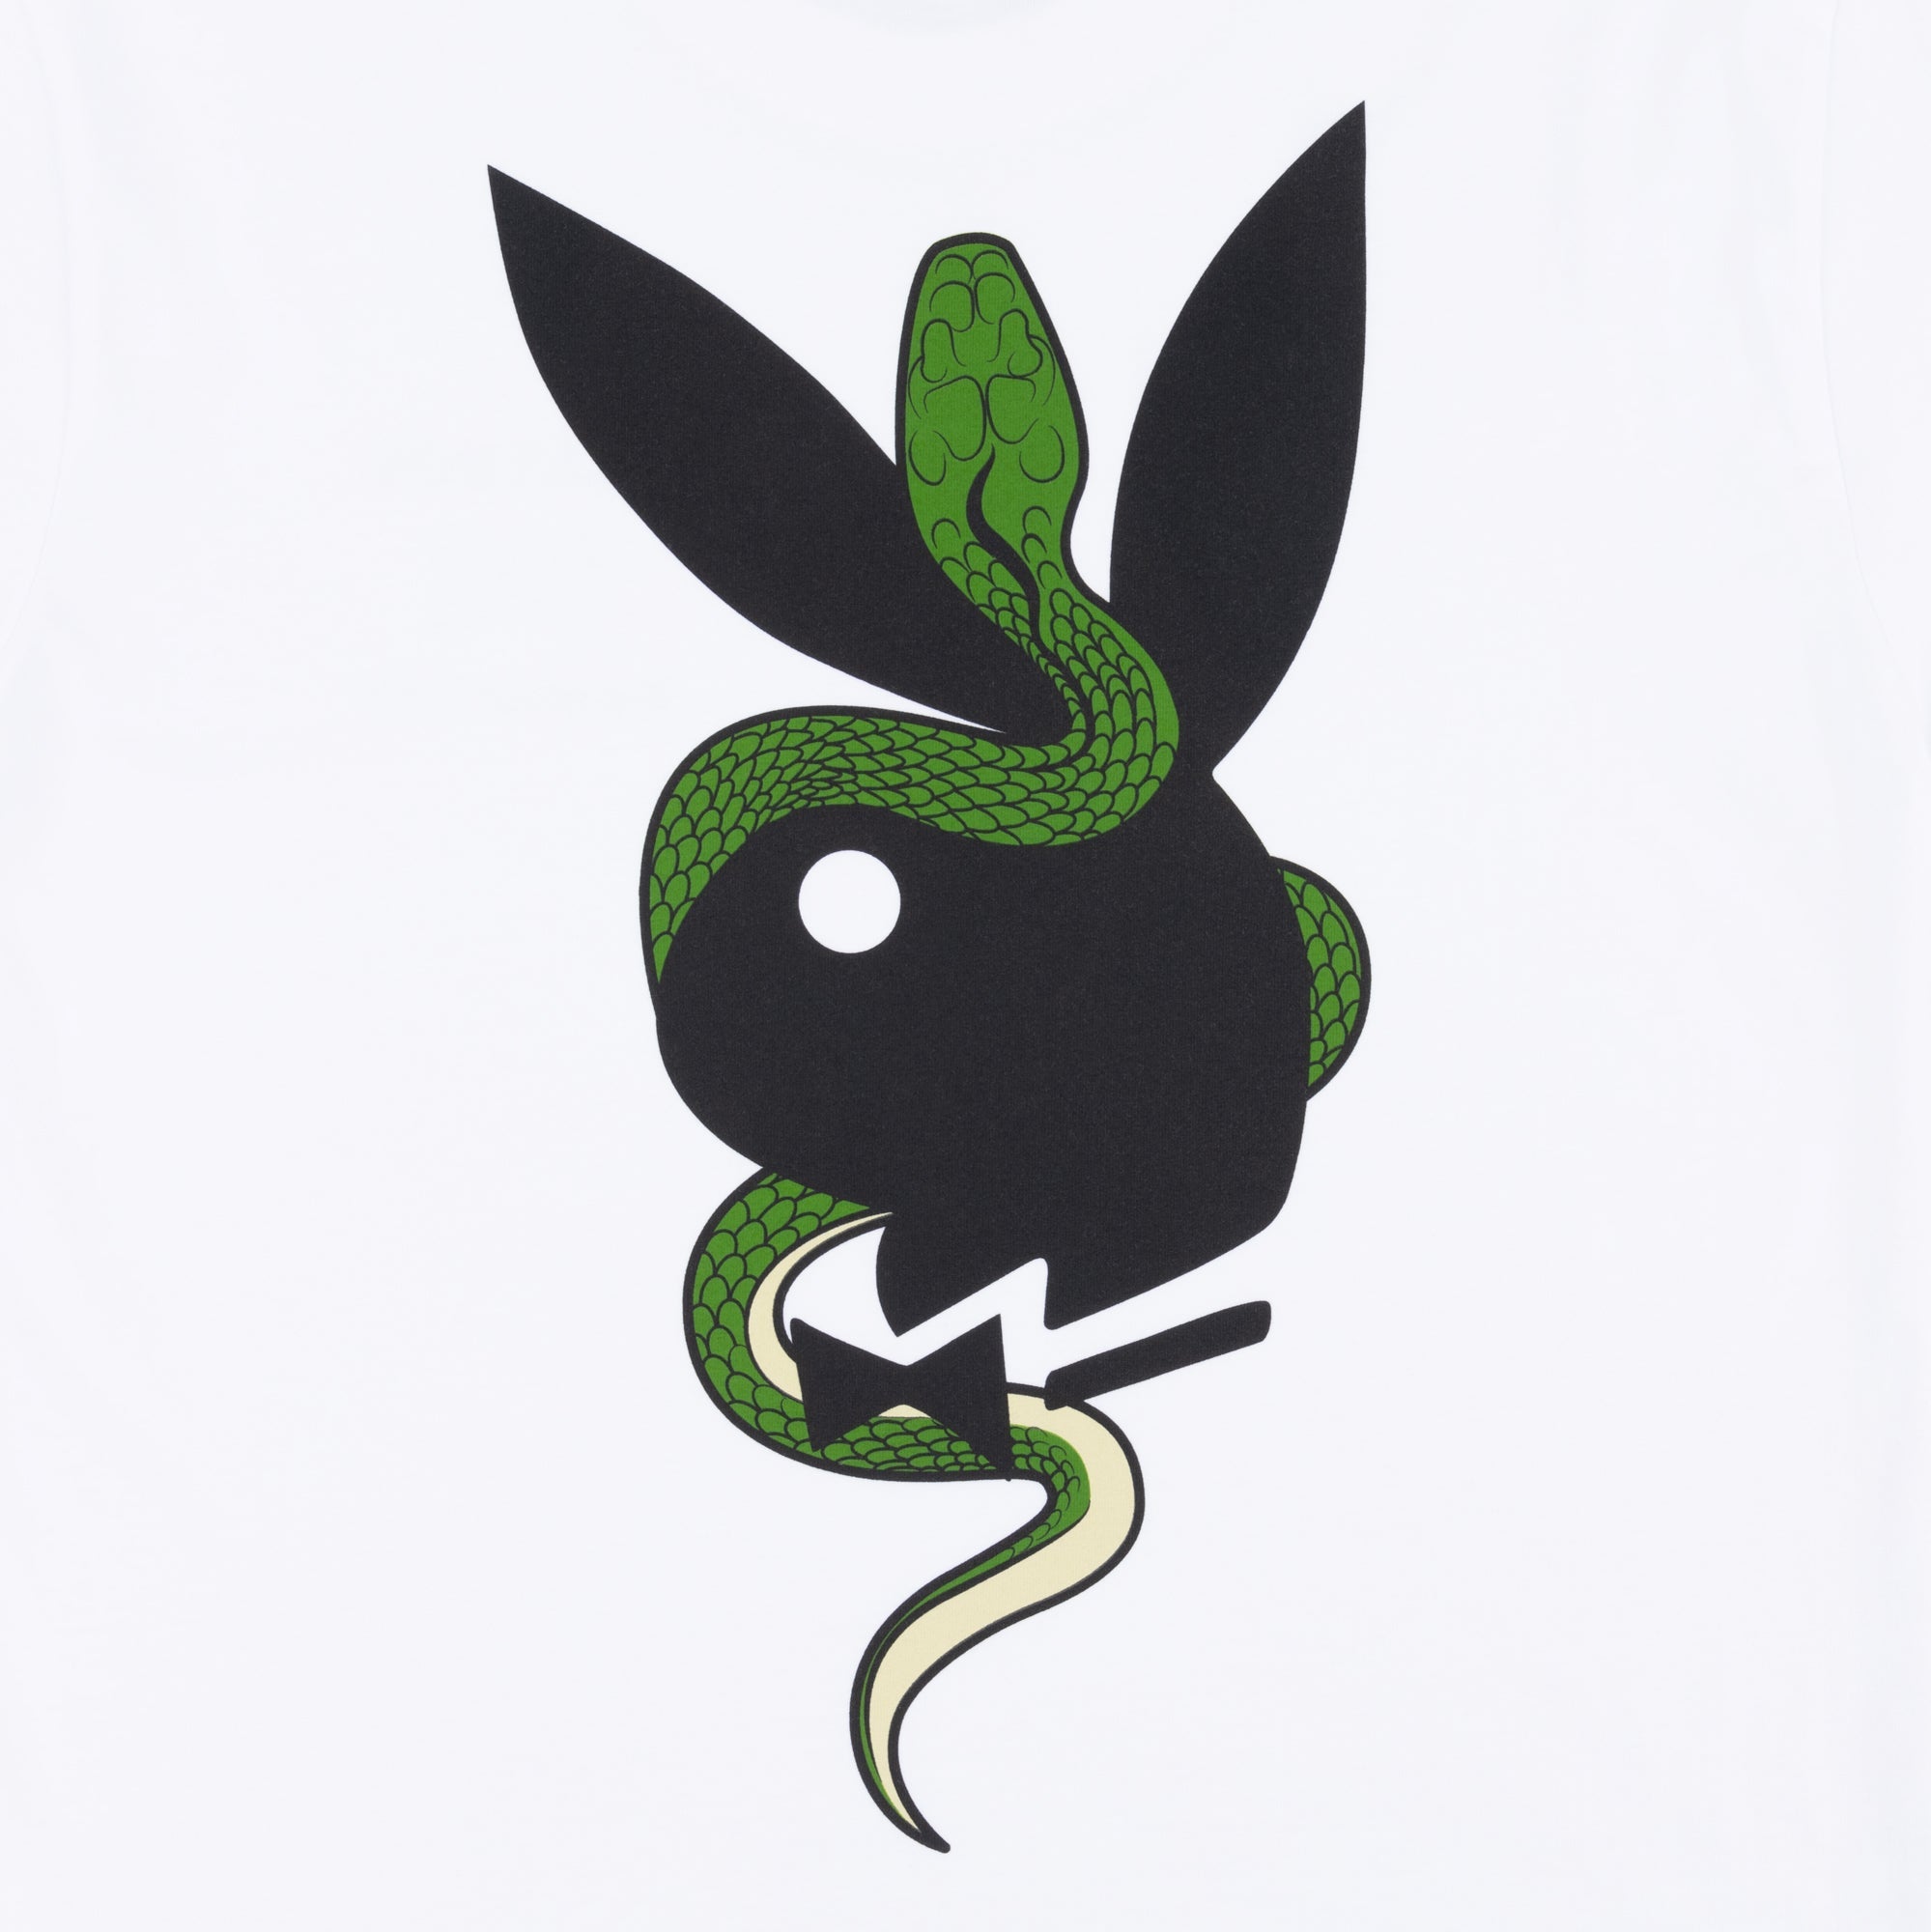 Playboy x The Great Frog T-Shirt